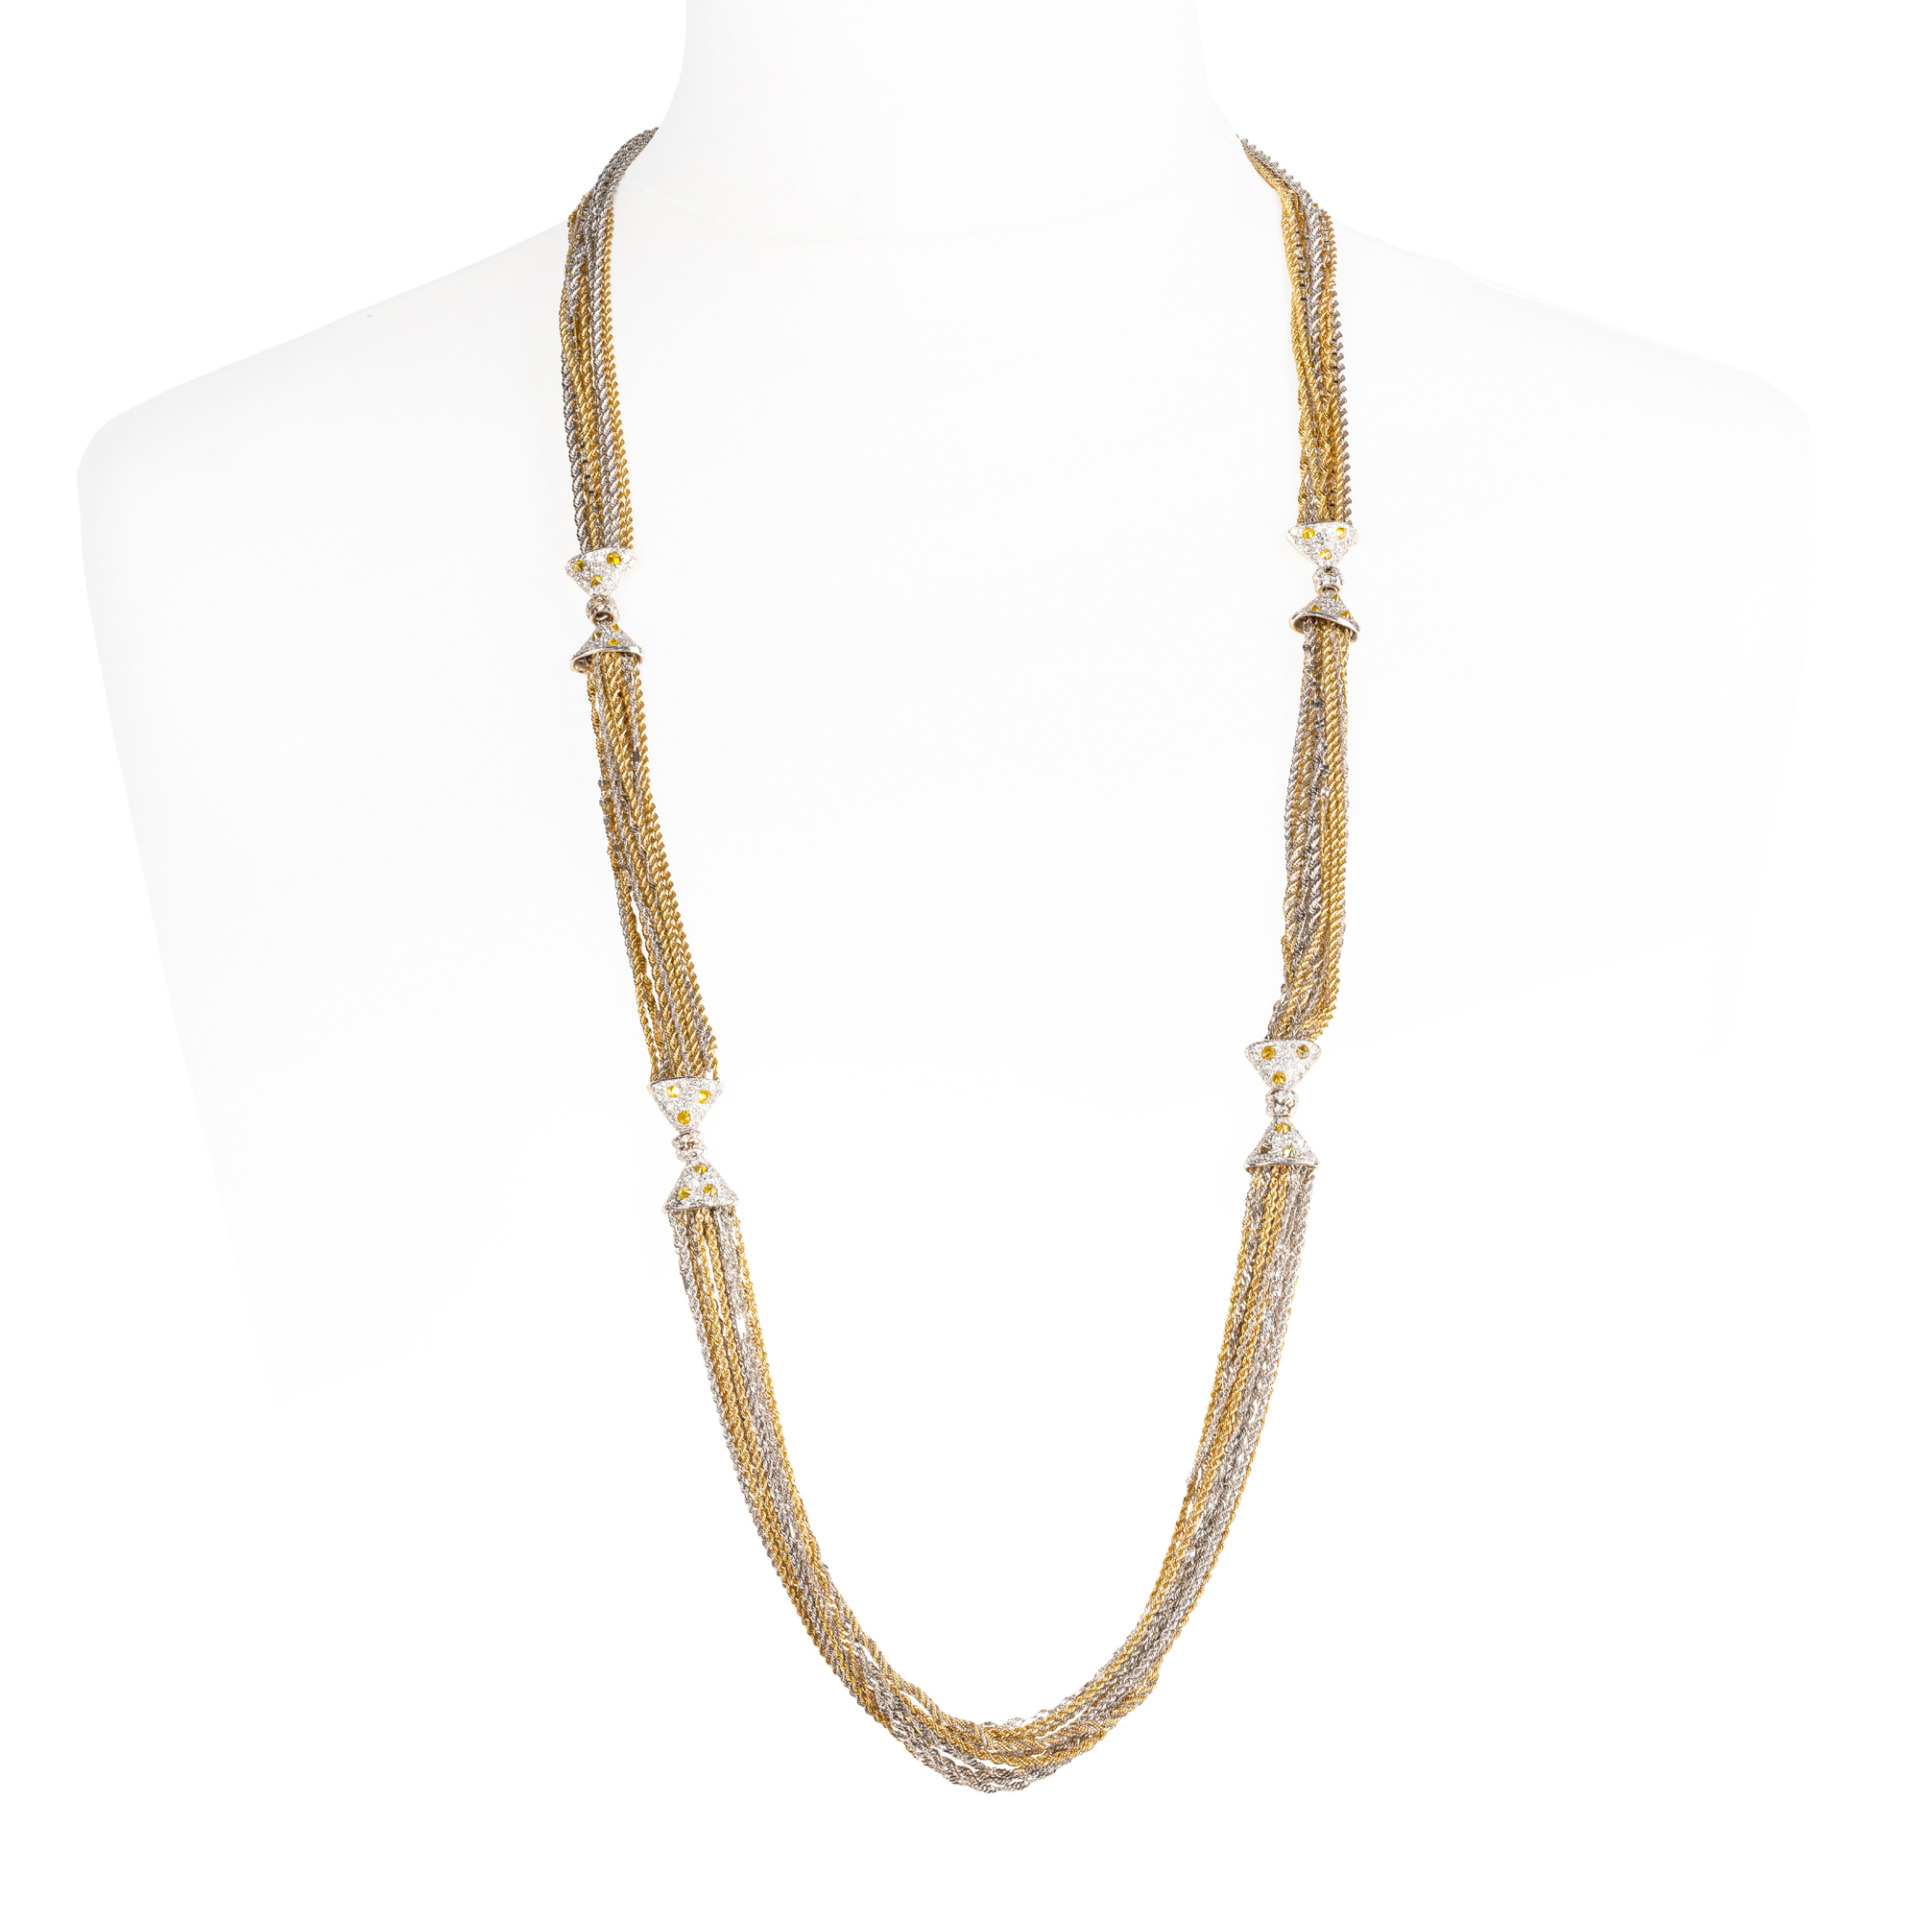 d'Avossa Necklace in White and Yellow Gold, with White and Fancy Yellow Diamonds